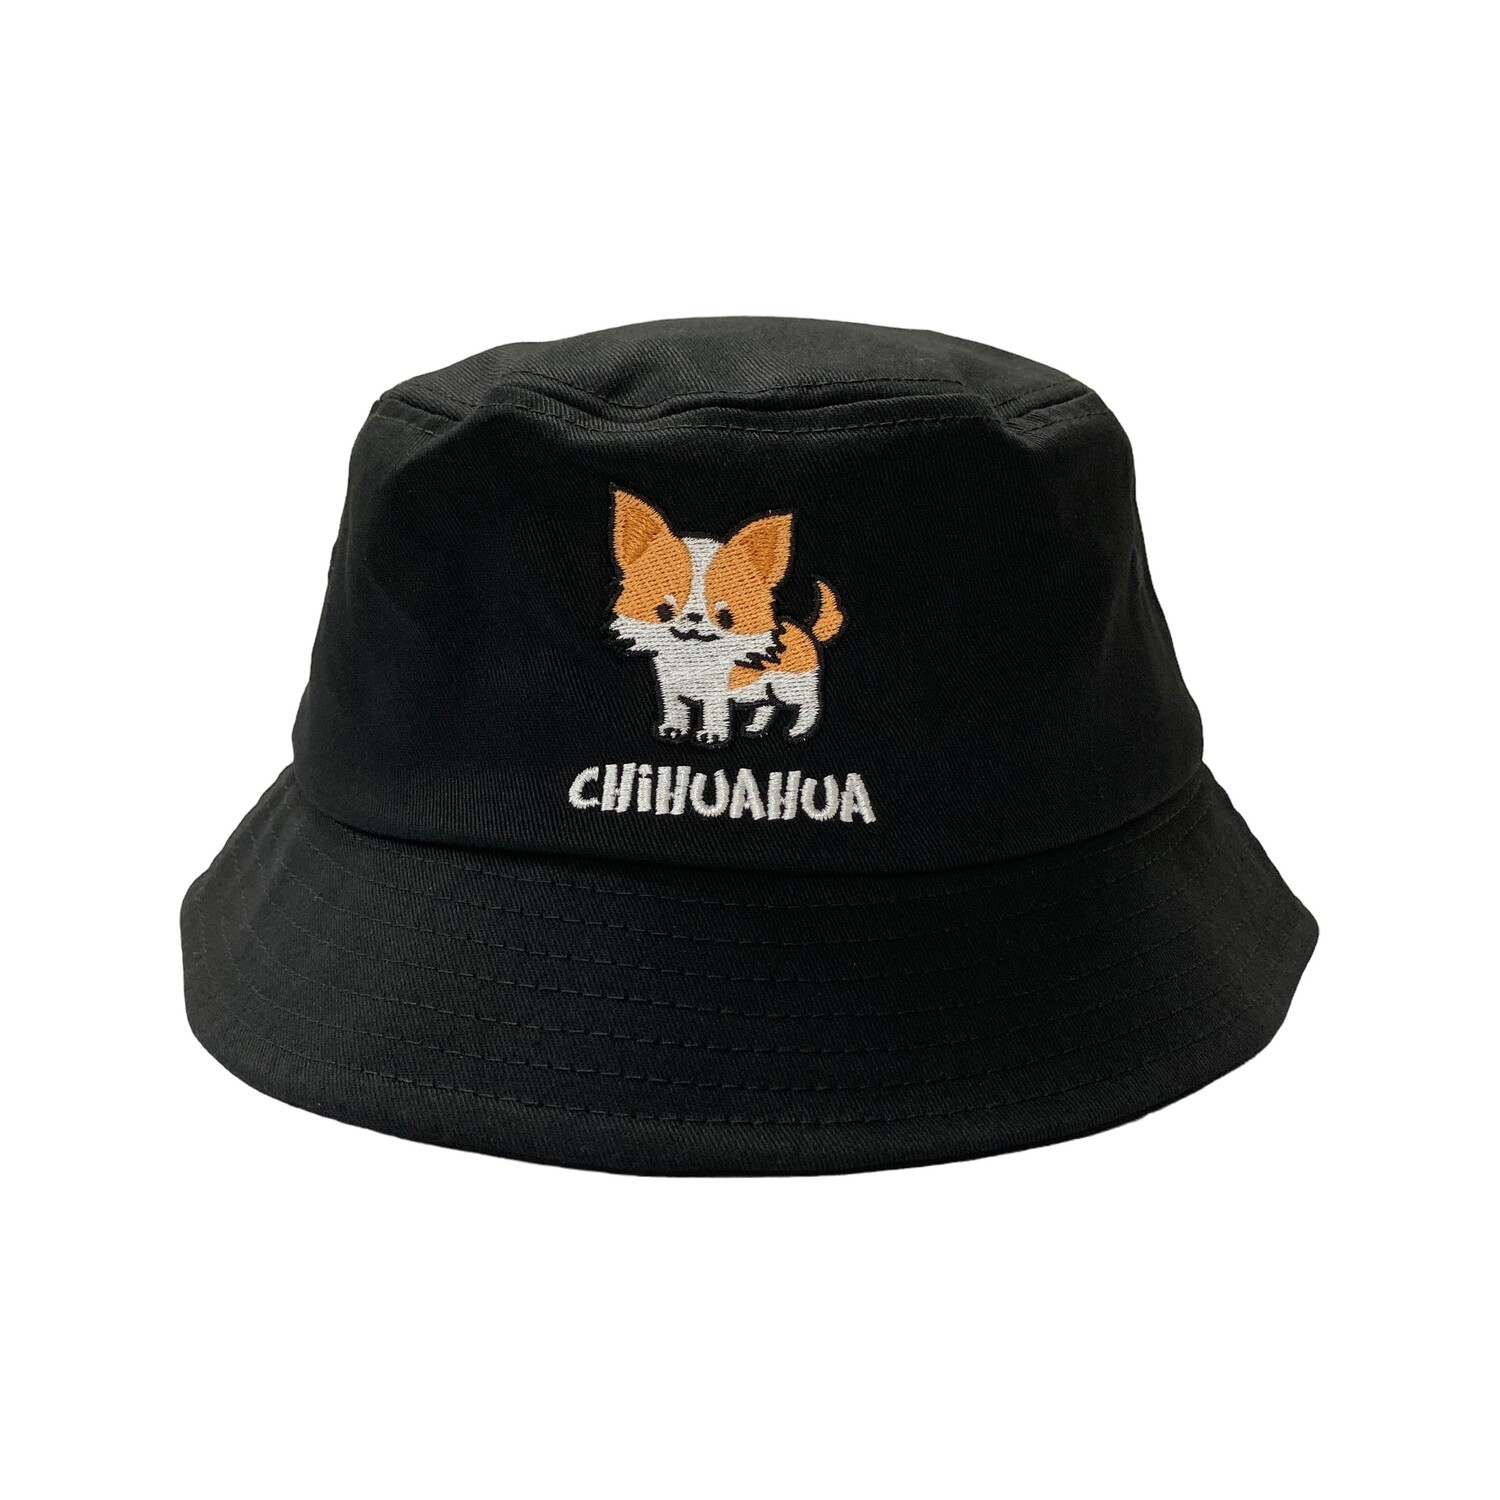 Chihuahua Embroidery Bucket Hat, Color: Black